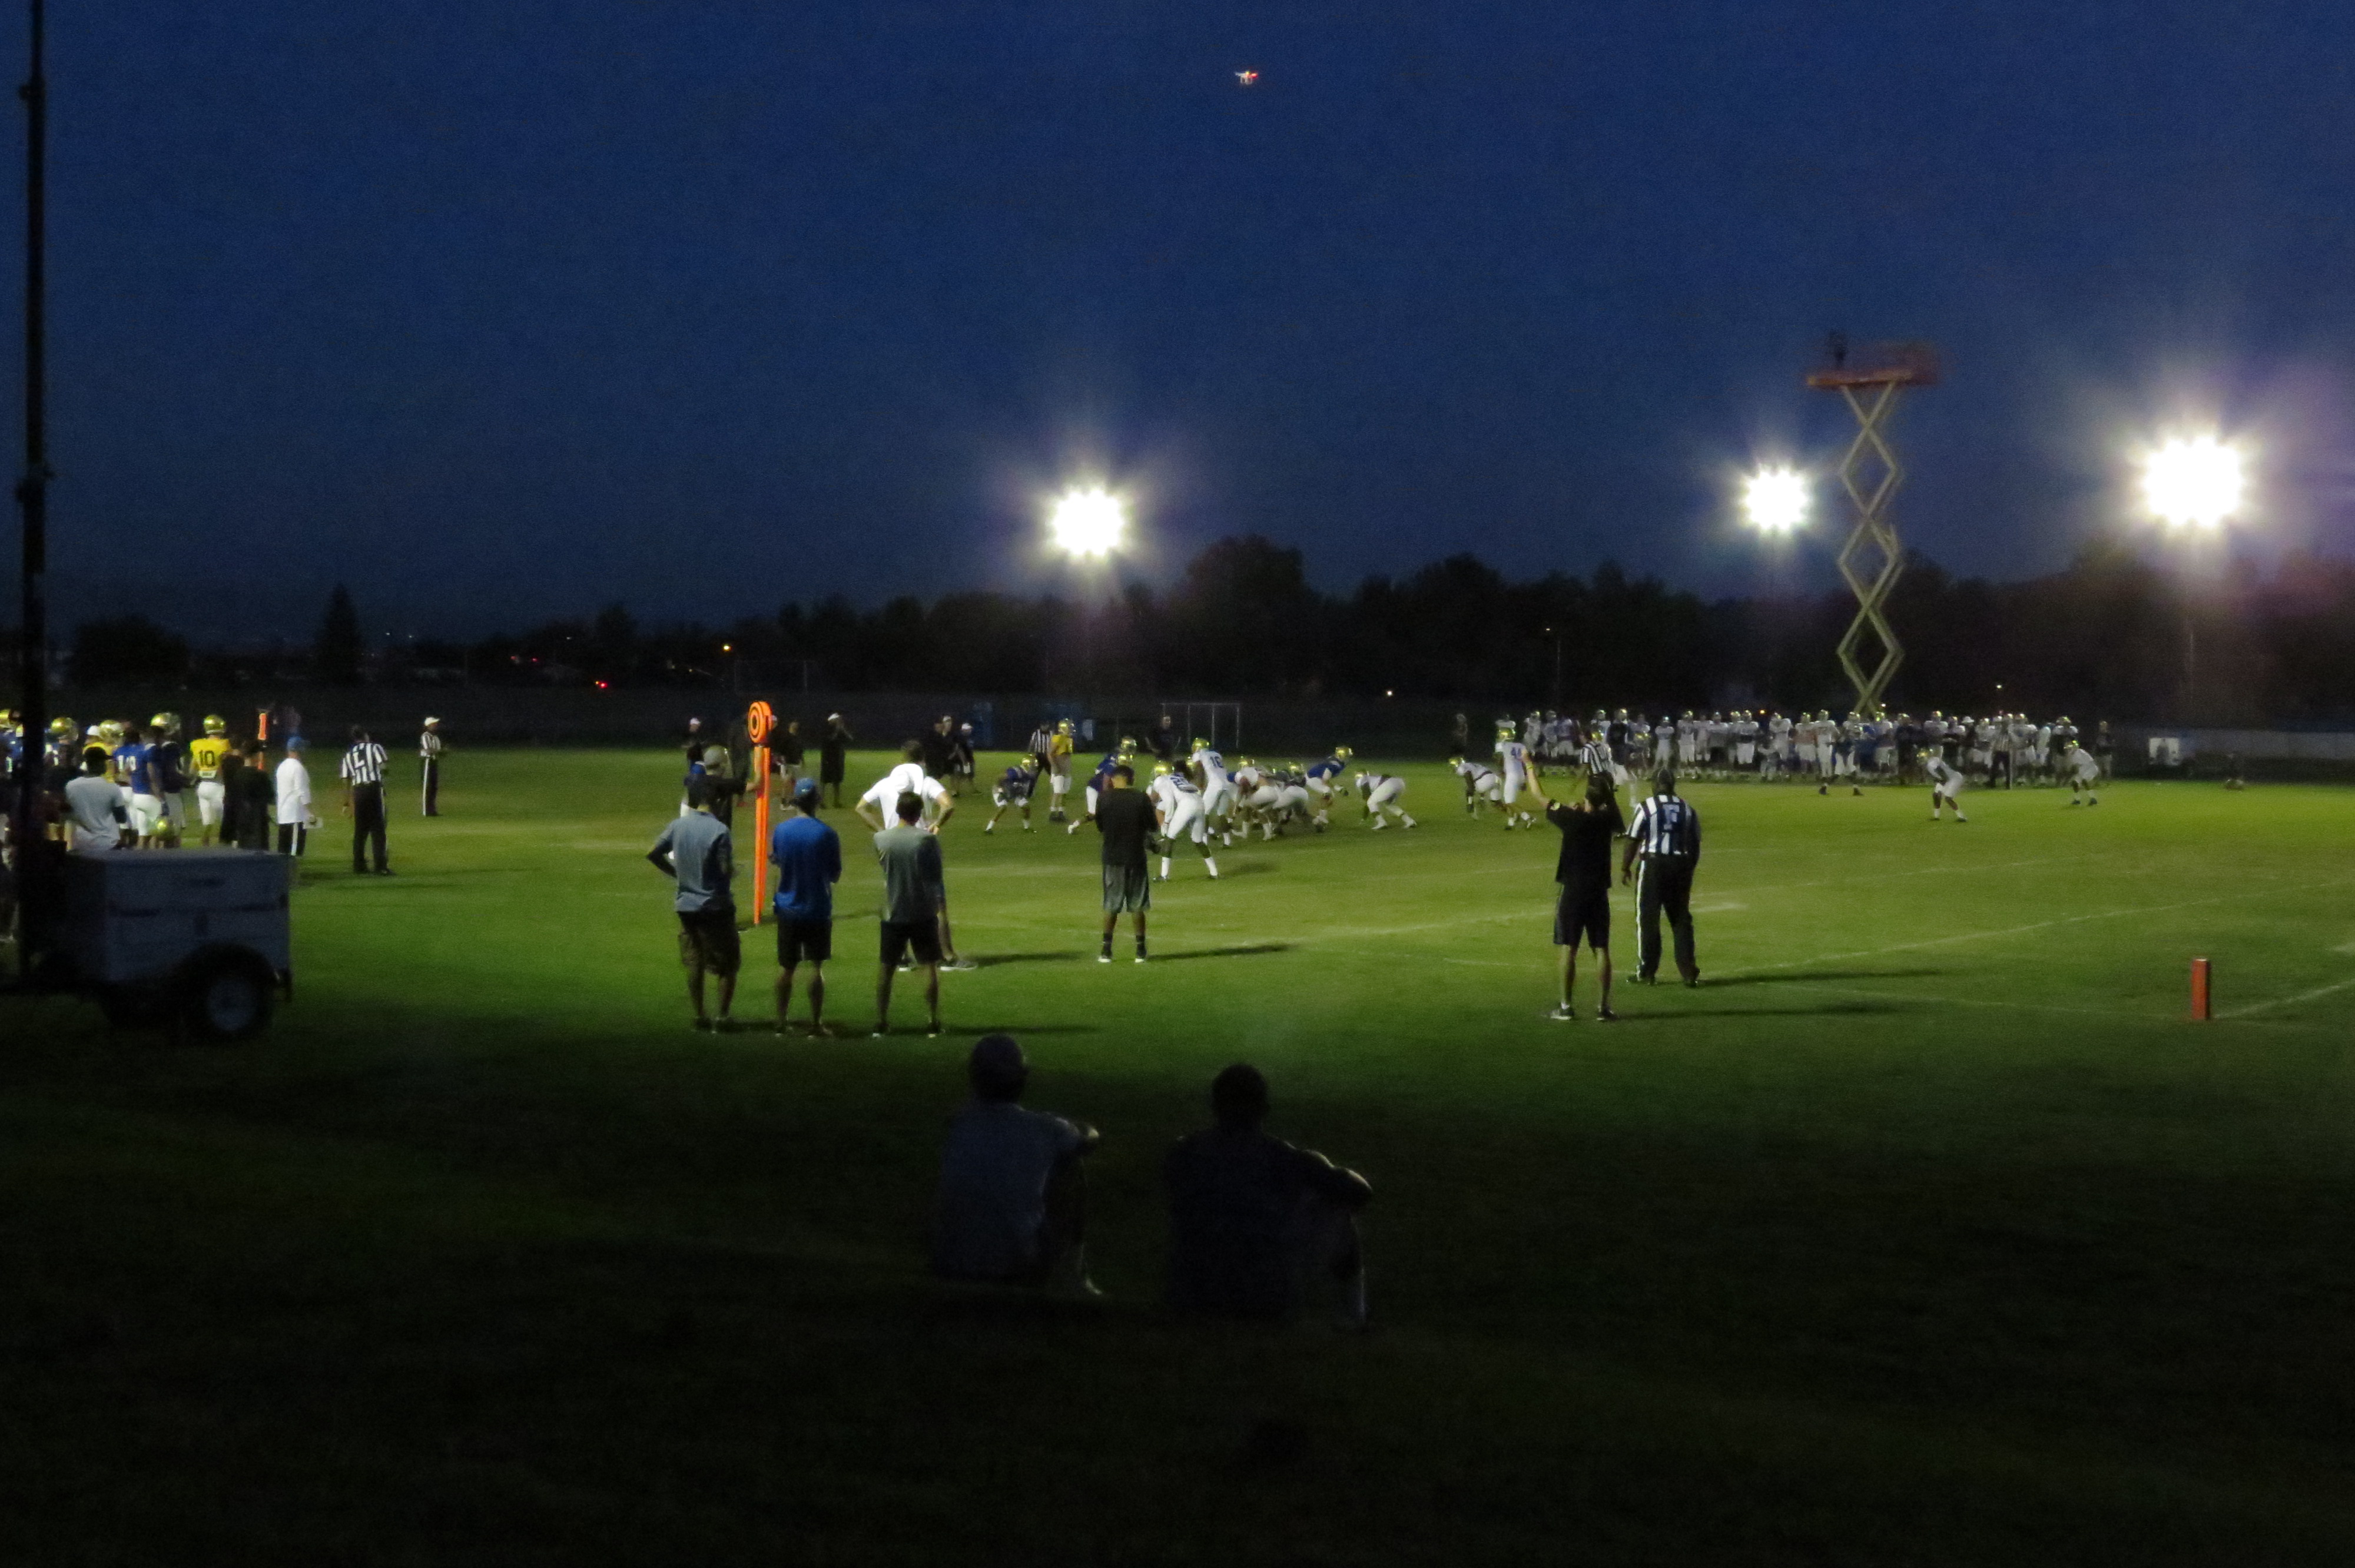 It was "Saturday Night Lights" when the start of practice was moved to 6:30pm due to the heat.